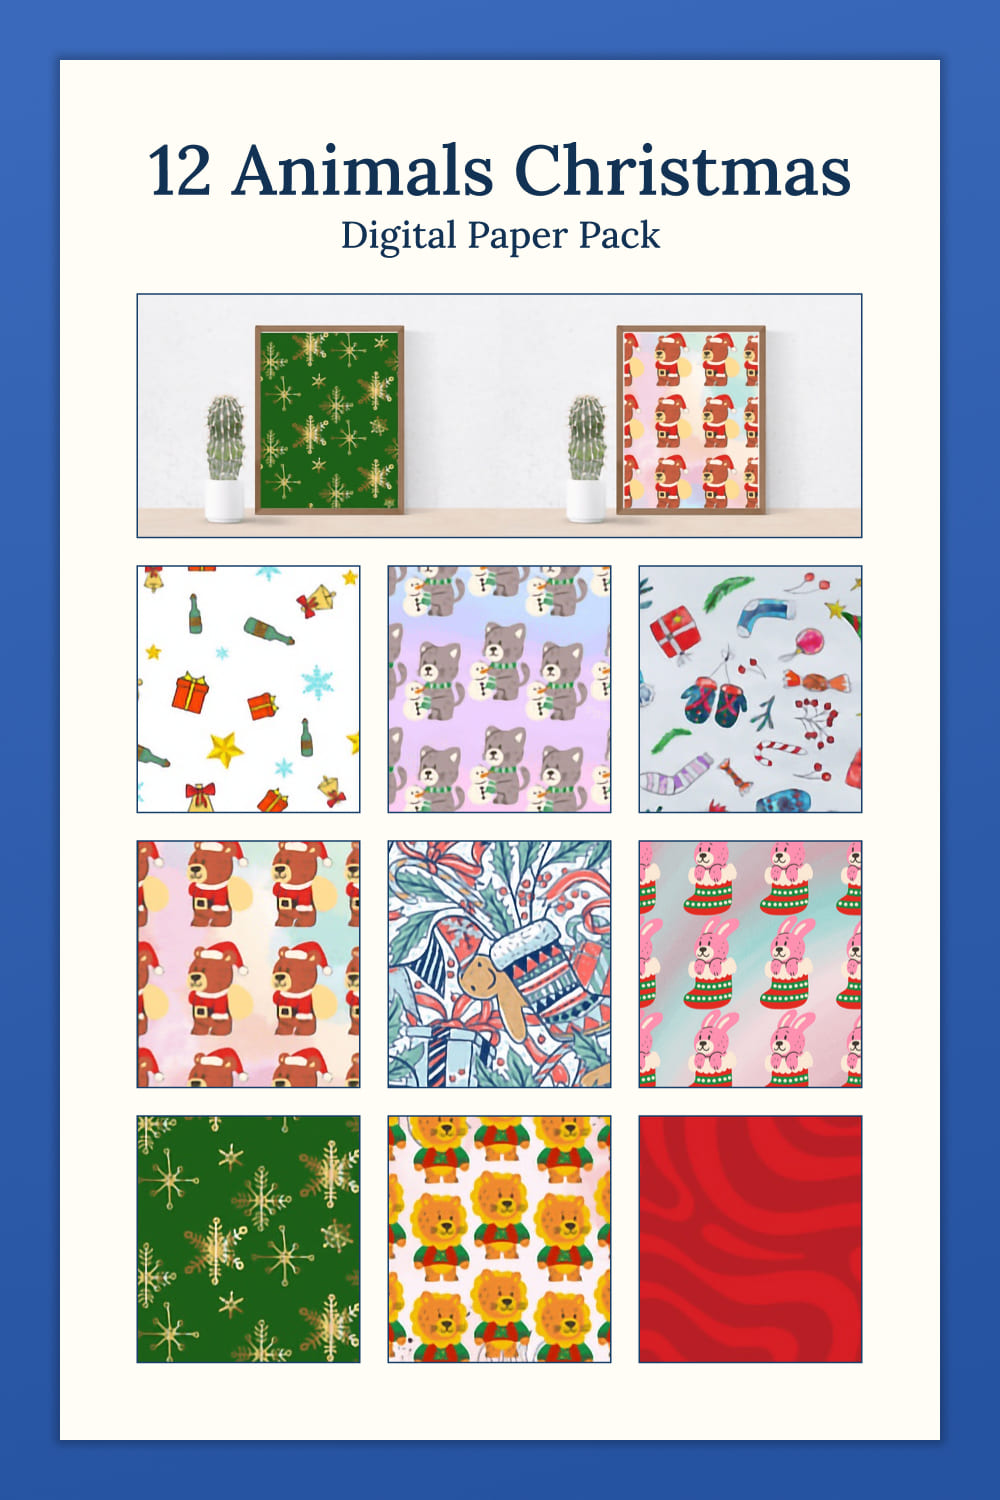 Examples of using images with Christmas animals on patterns.